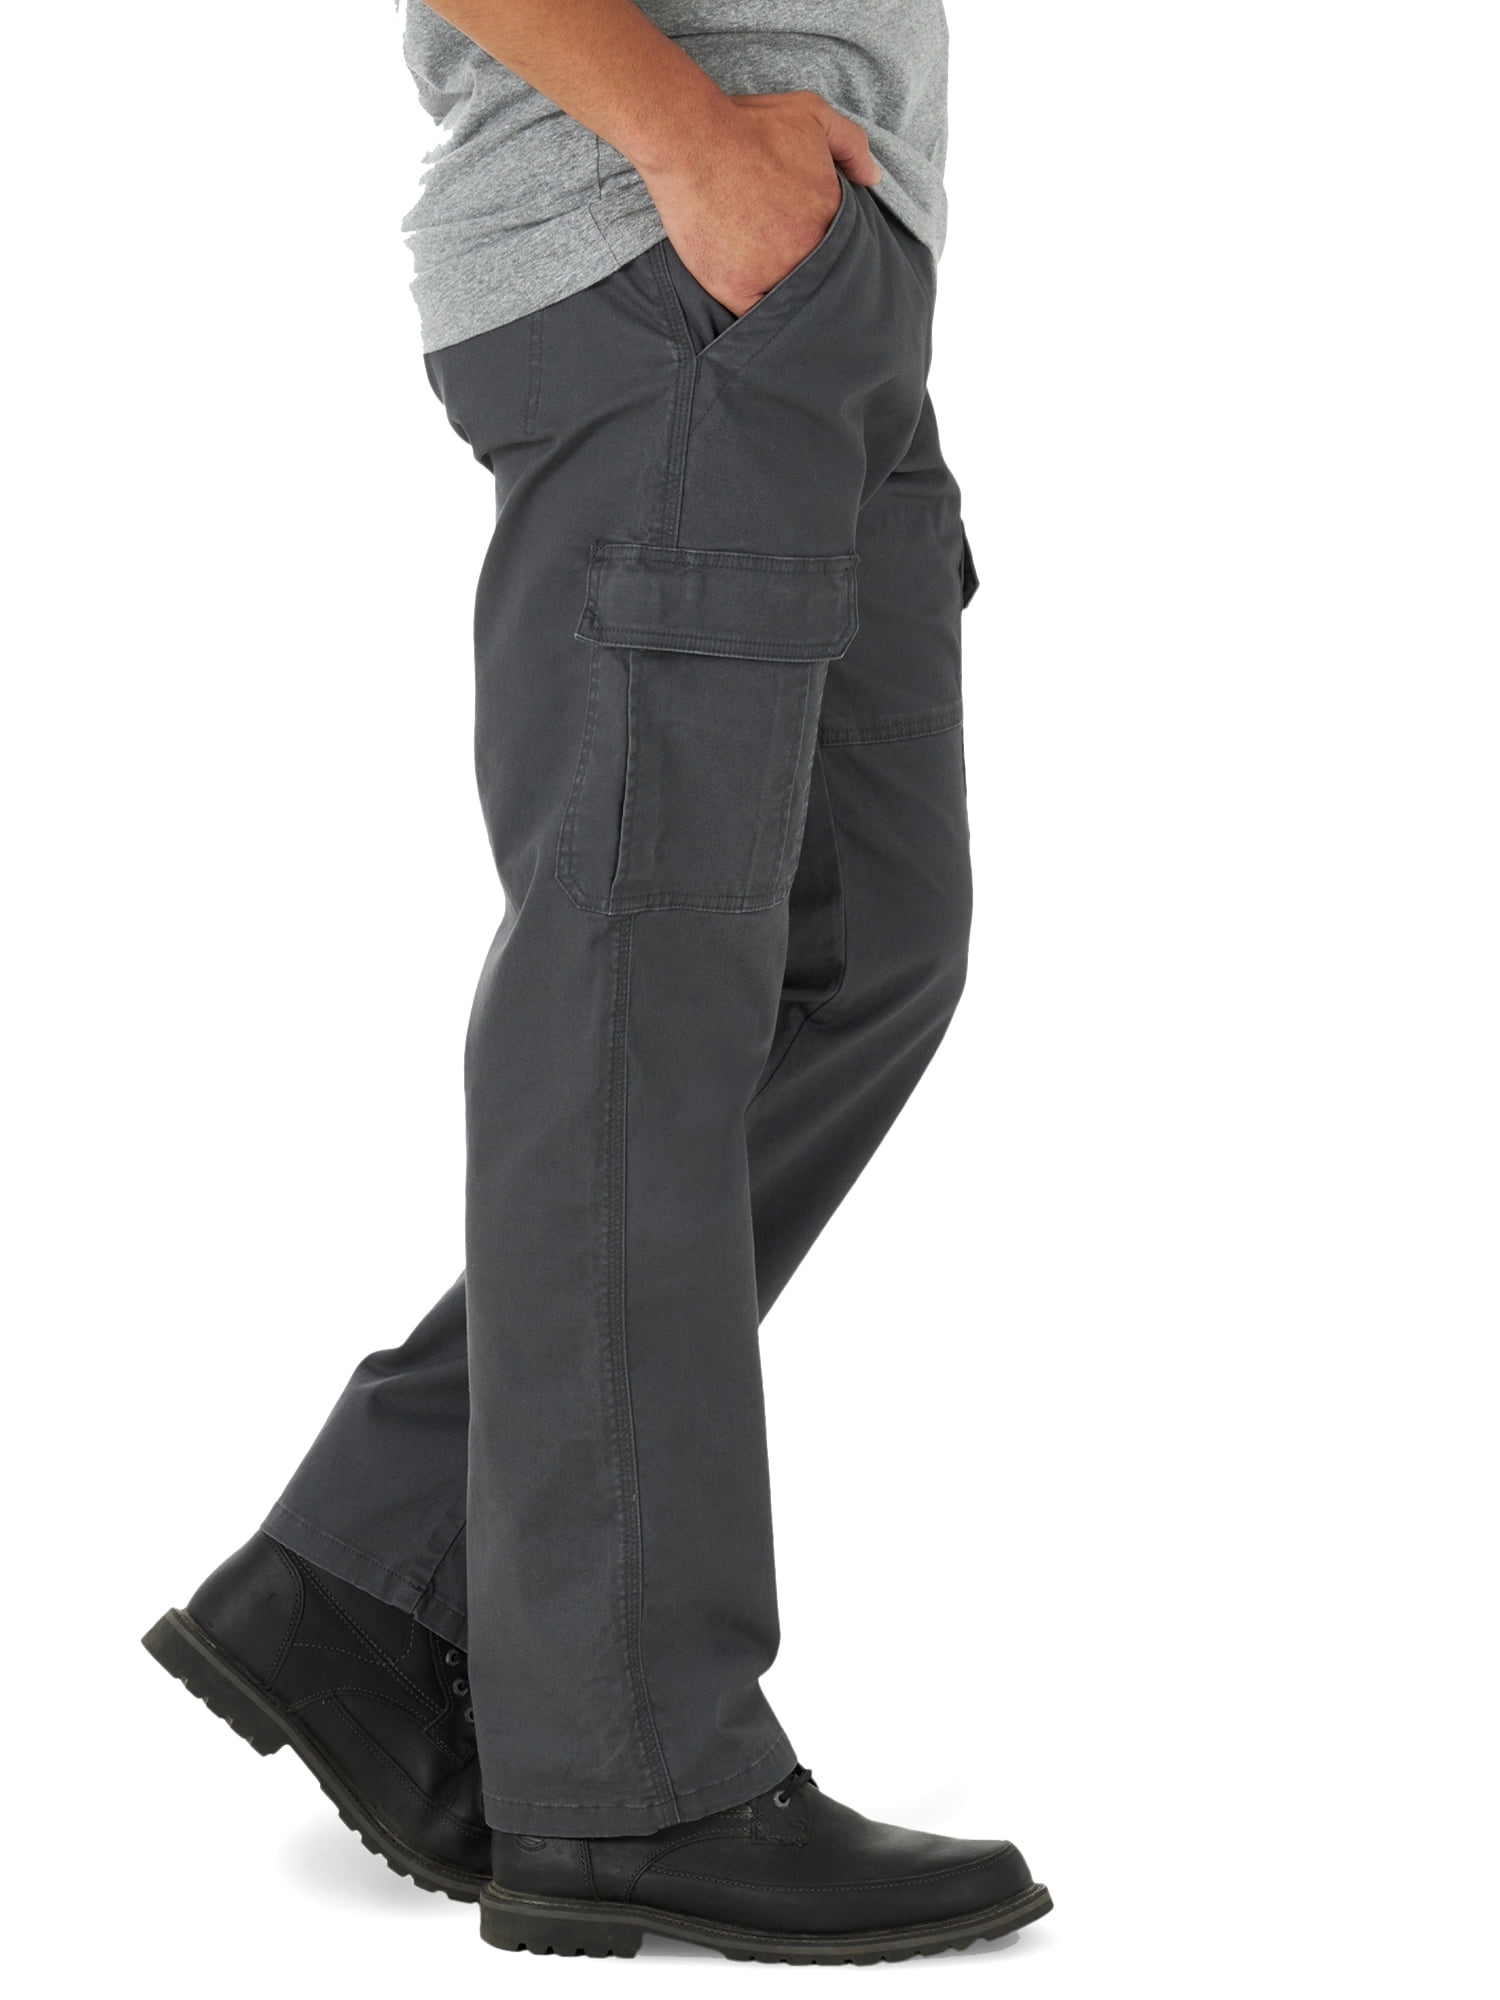 Wrangler Men's Five Star Premium Relaxed Fit Cargo Pants with Stretch  Anthracite Grey 32x30 at  Men's Clothing store